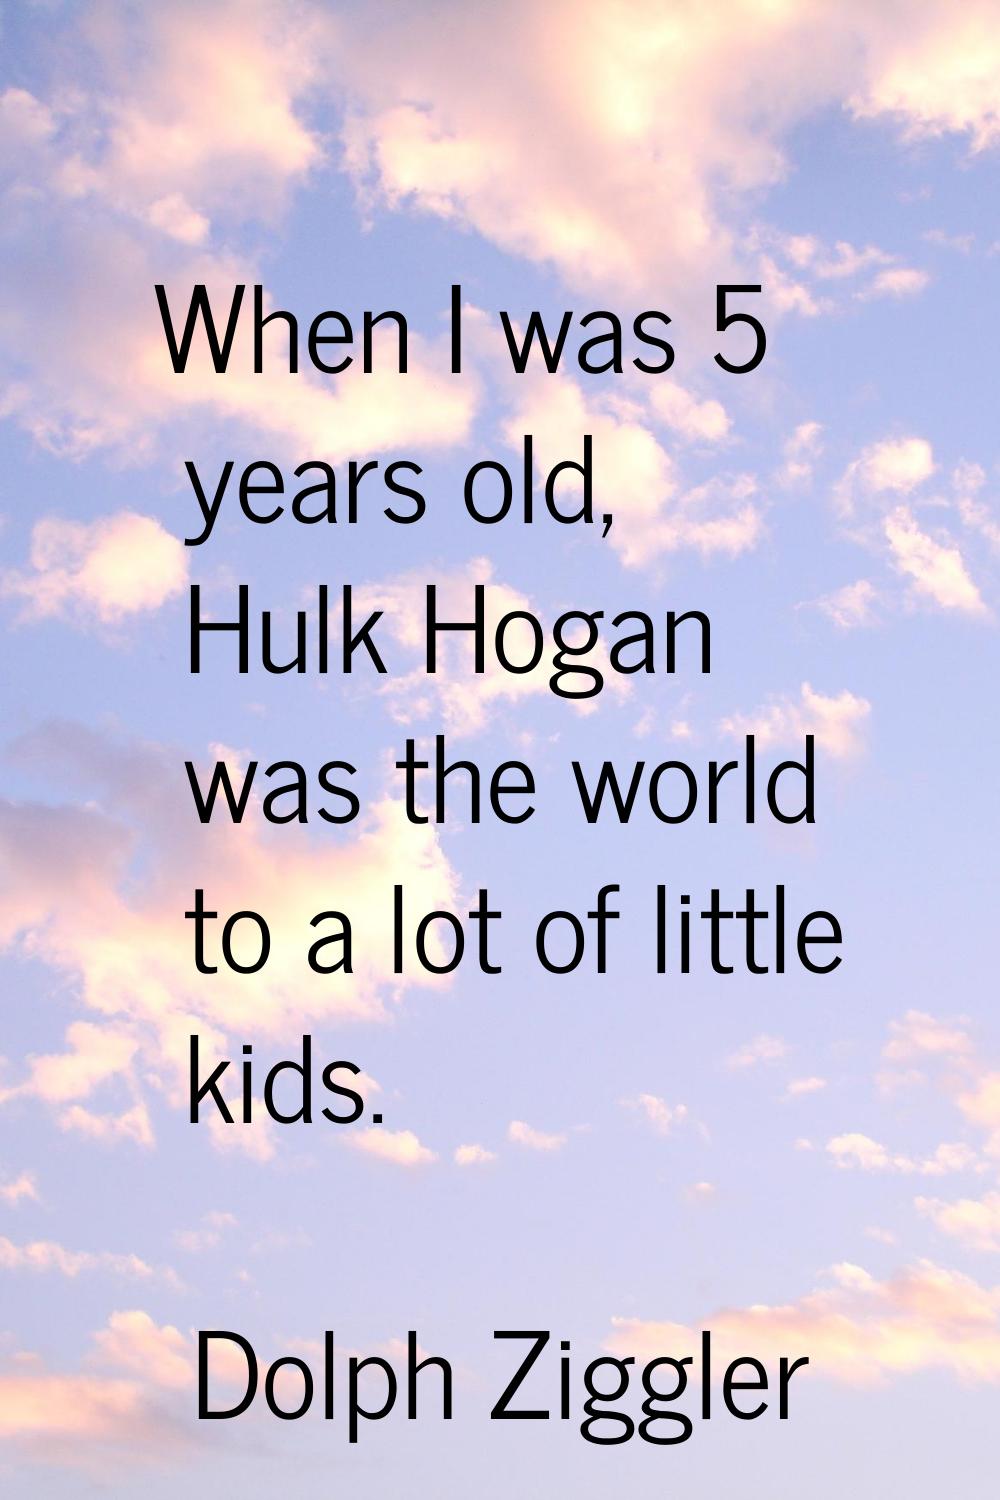 When I was 5 years old, Hulk Hogan was the world to a lot of little kids.